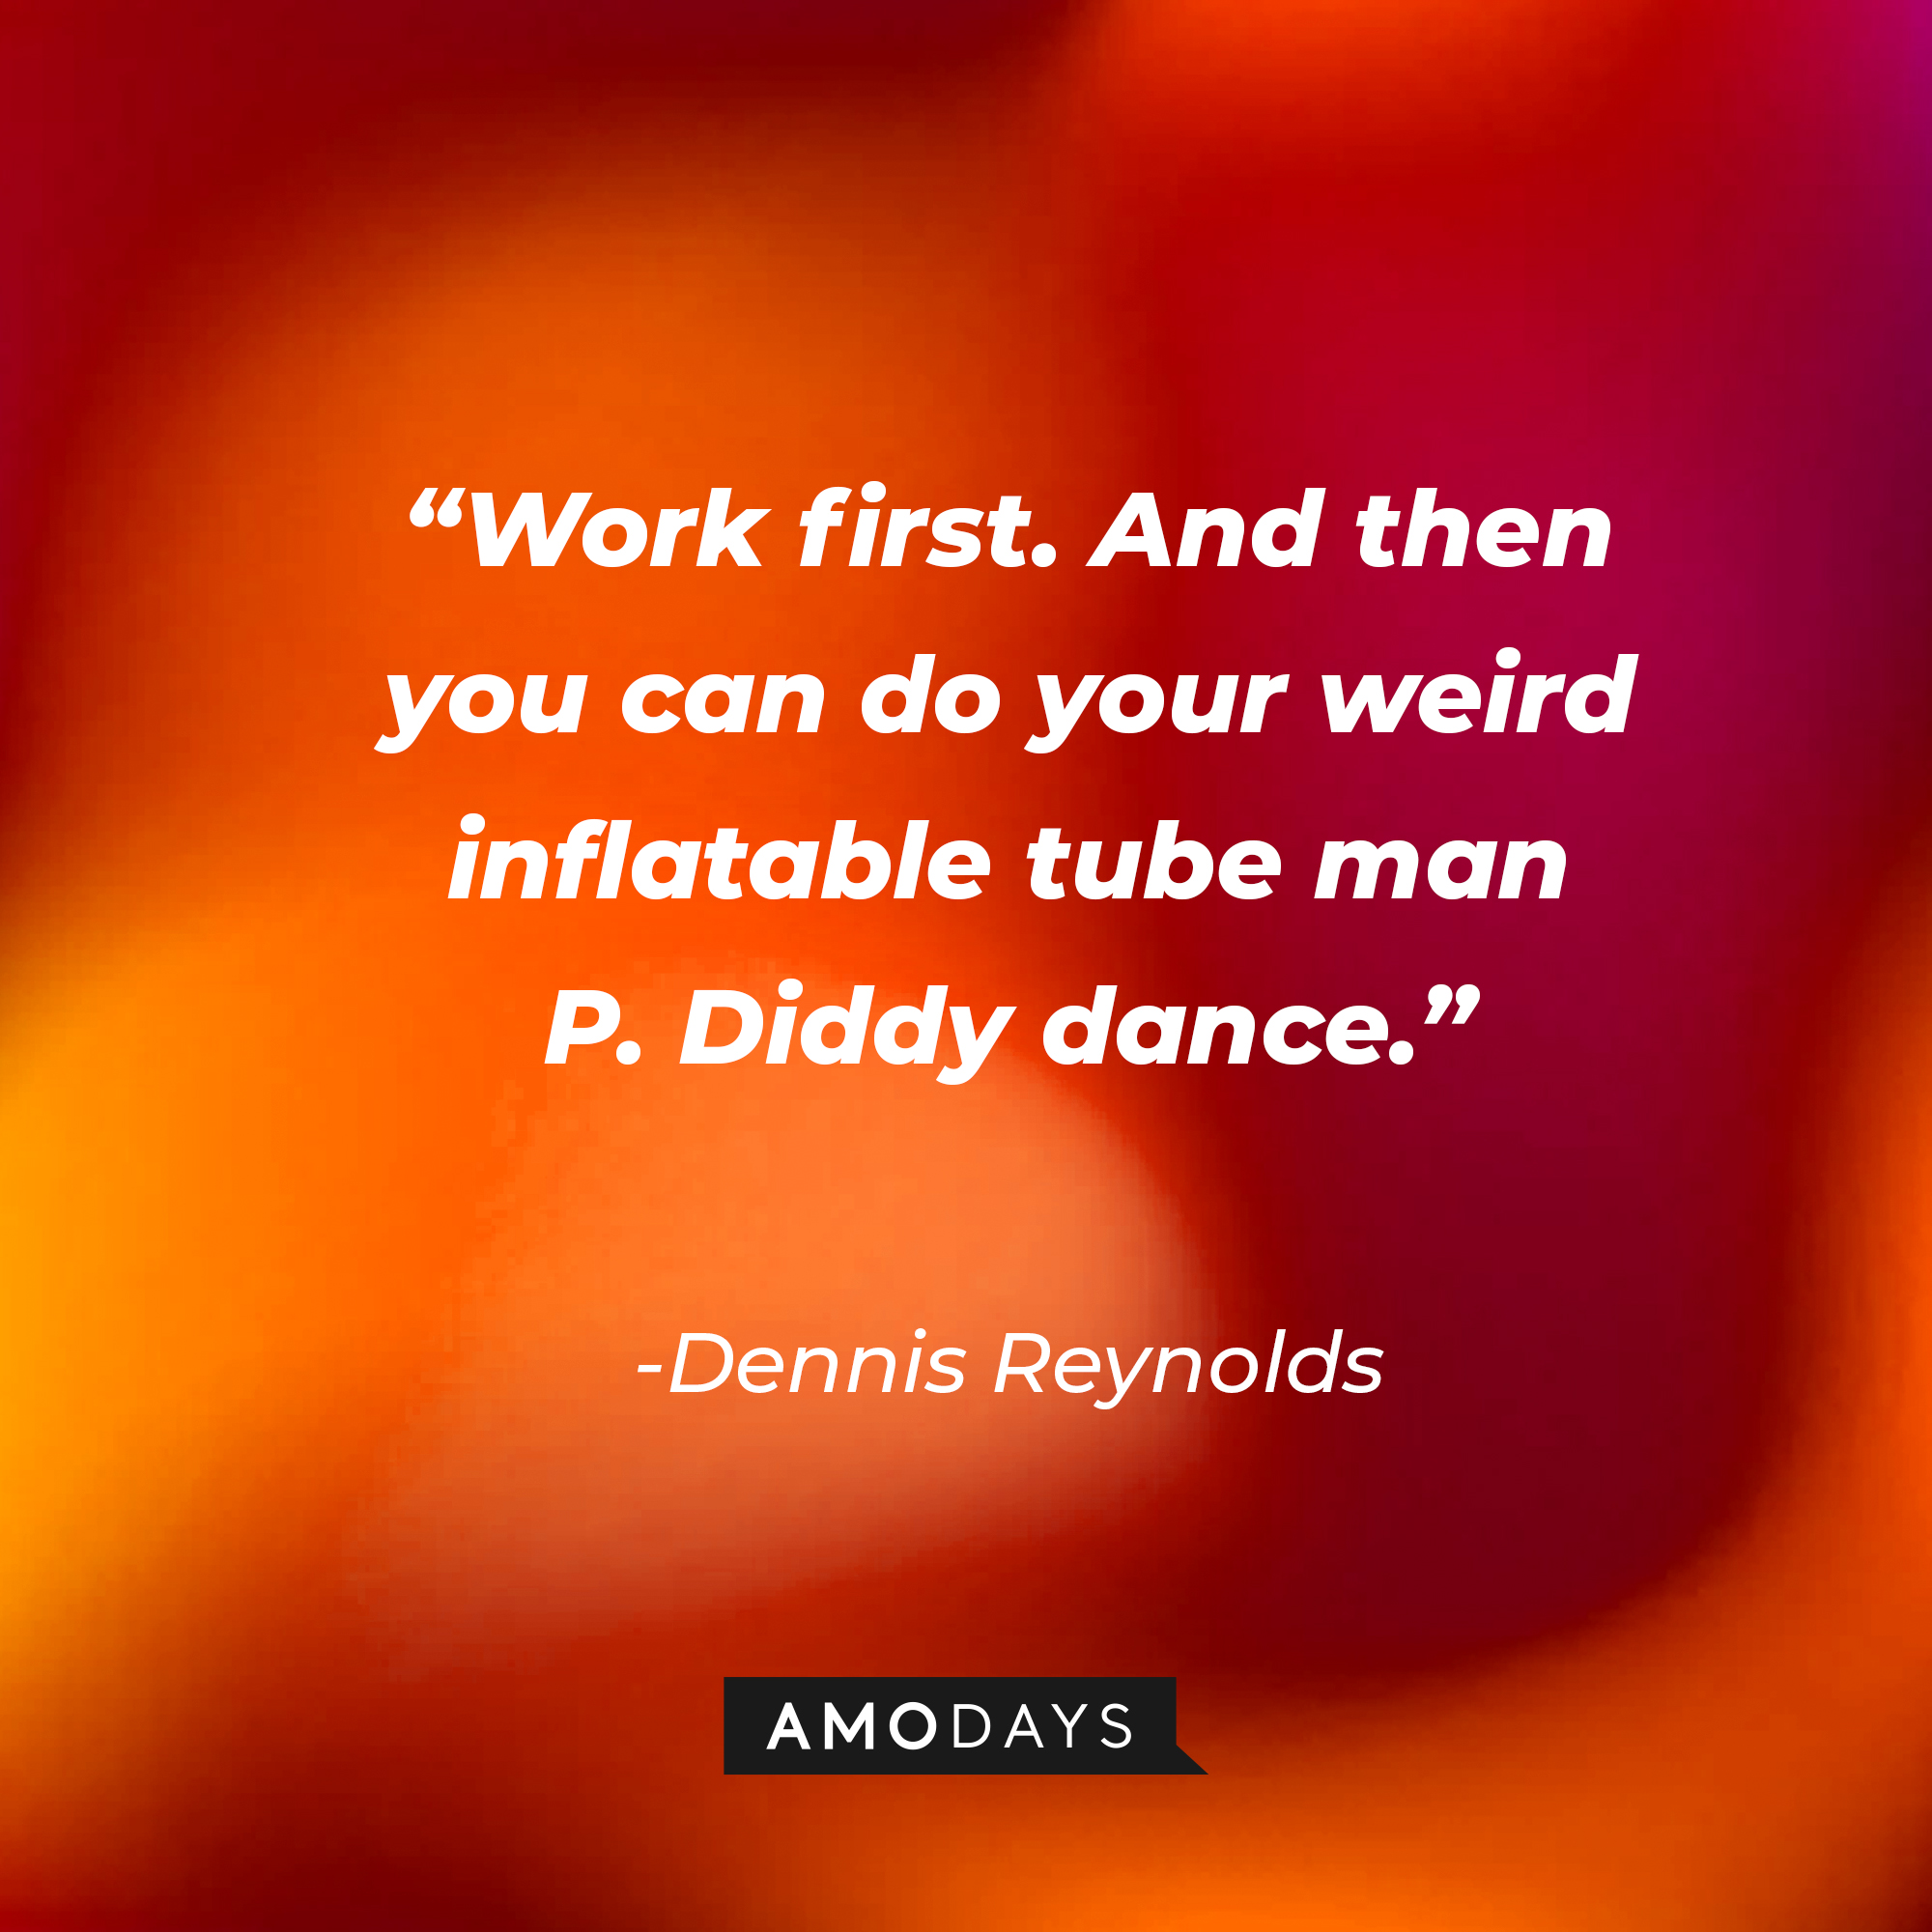 Dennis Reynolds’ quote:  “Work first. And then you can do your weird inflatable tube man P. Diddy dance.” | Source: AmoDays